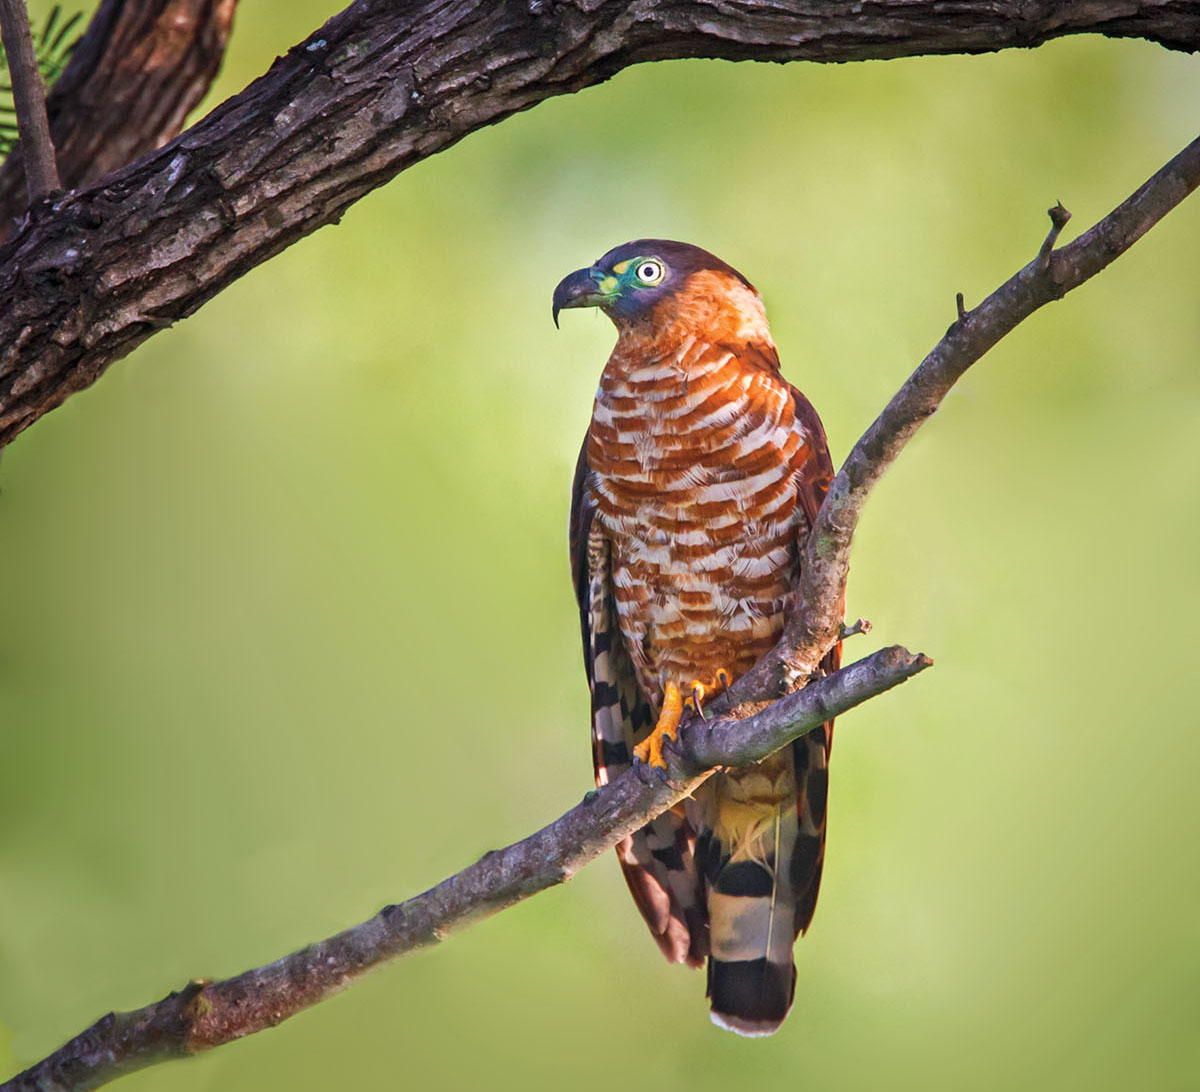 An orange feathered bird sits on a brown wooden branch on a green background